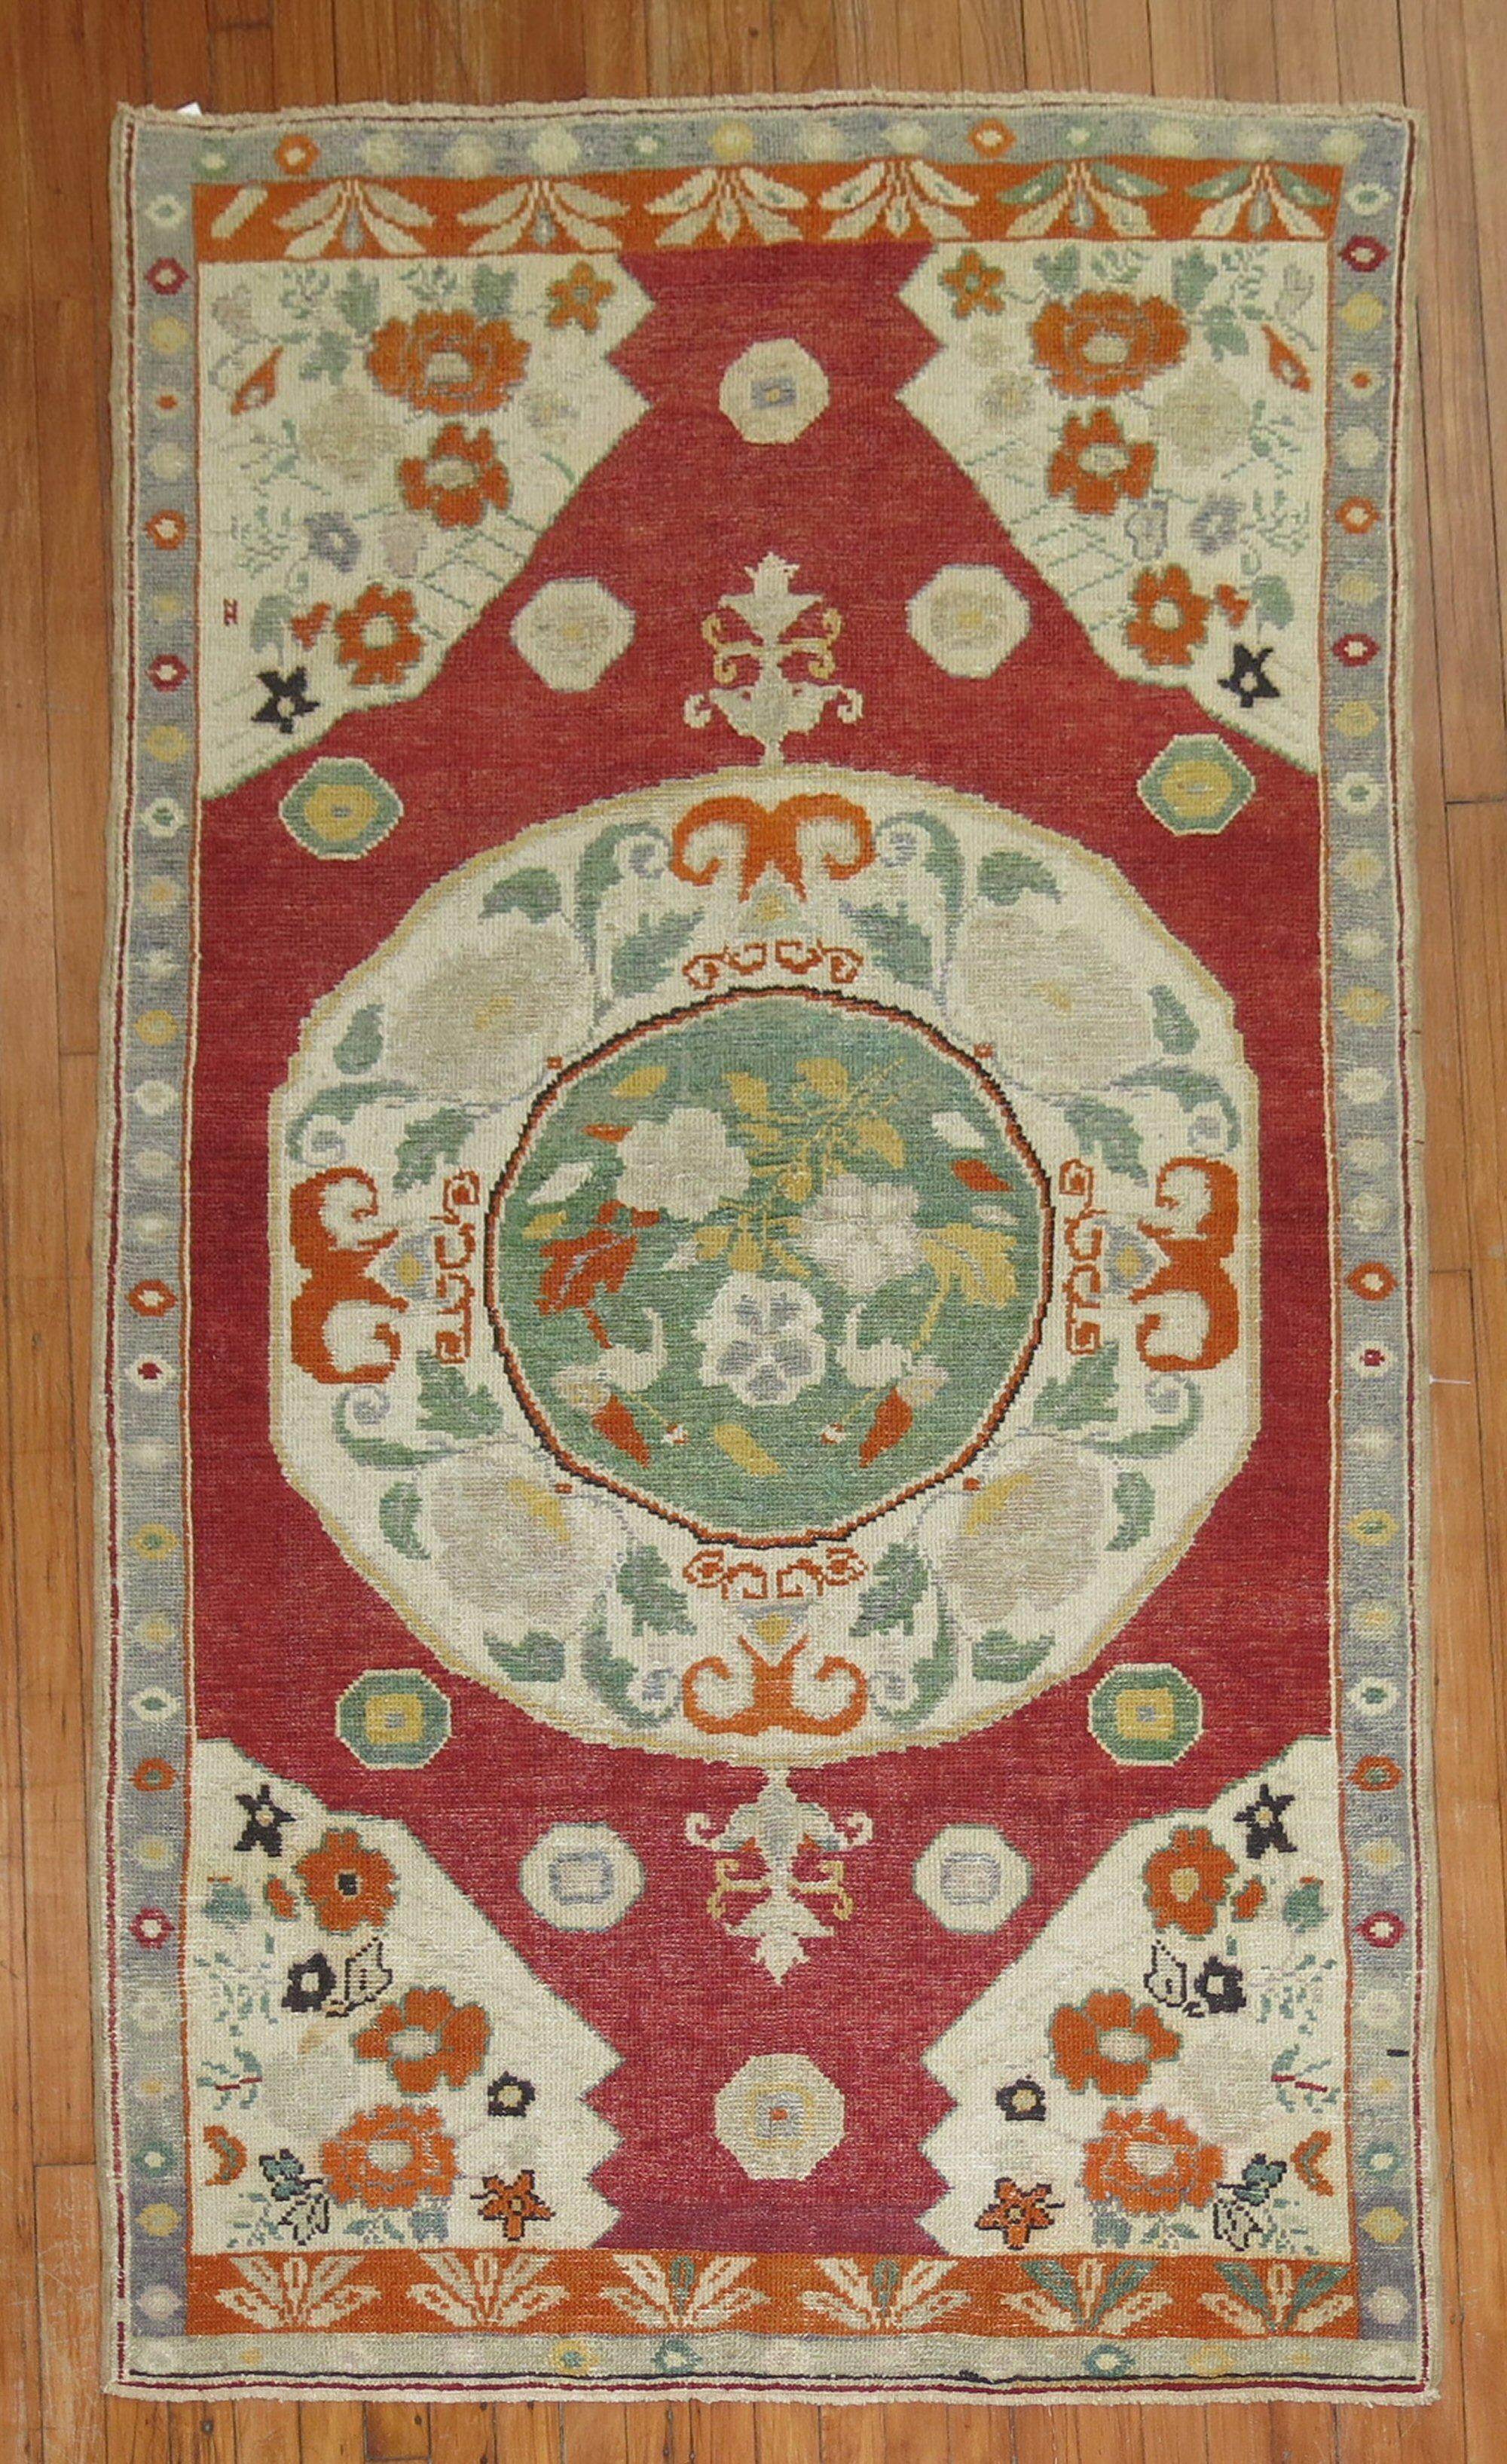 2nd quarter of the 20th Century accent size colorufl oushak rug.

3'11'' x 6'11''